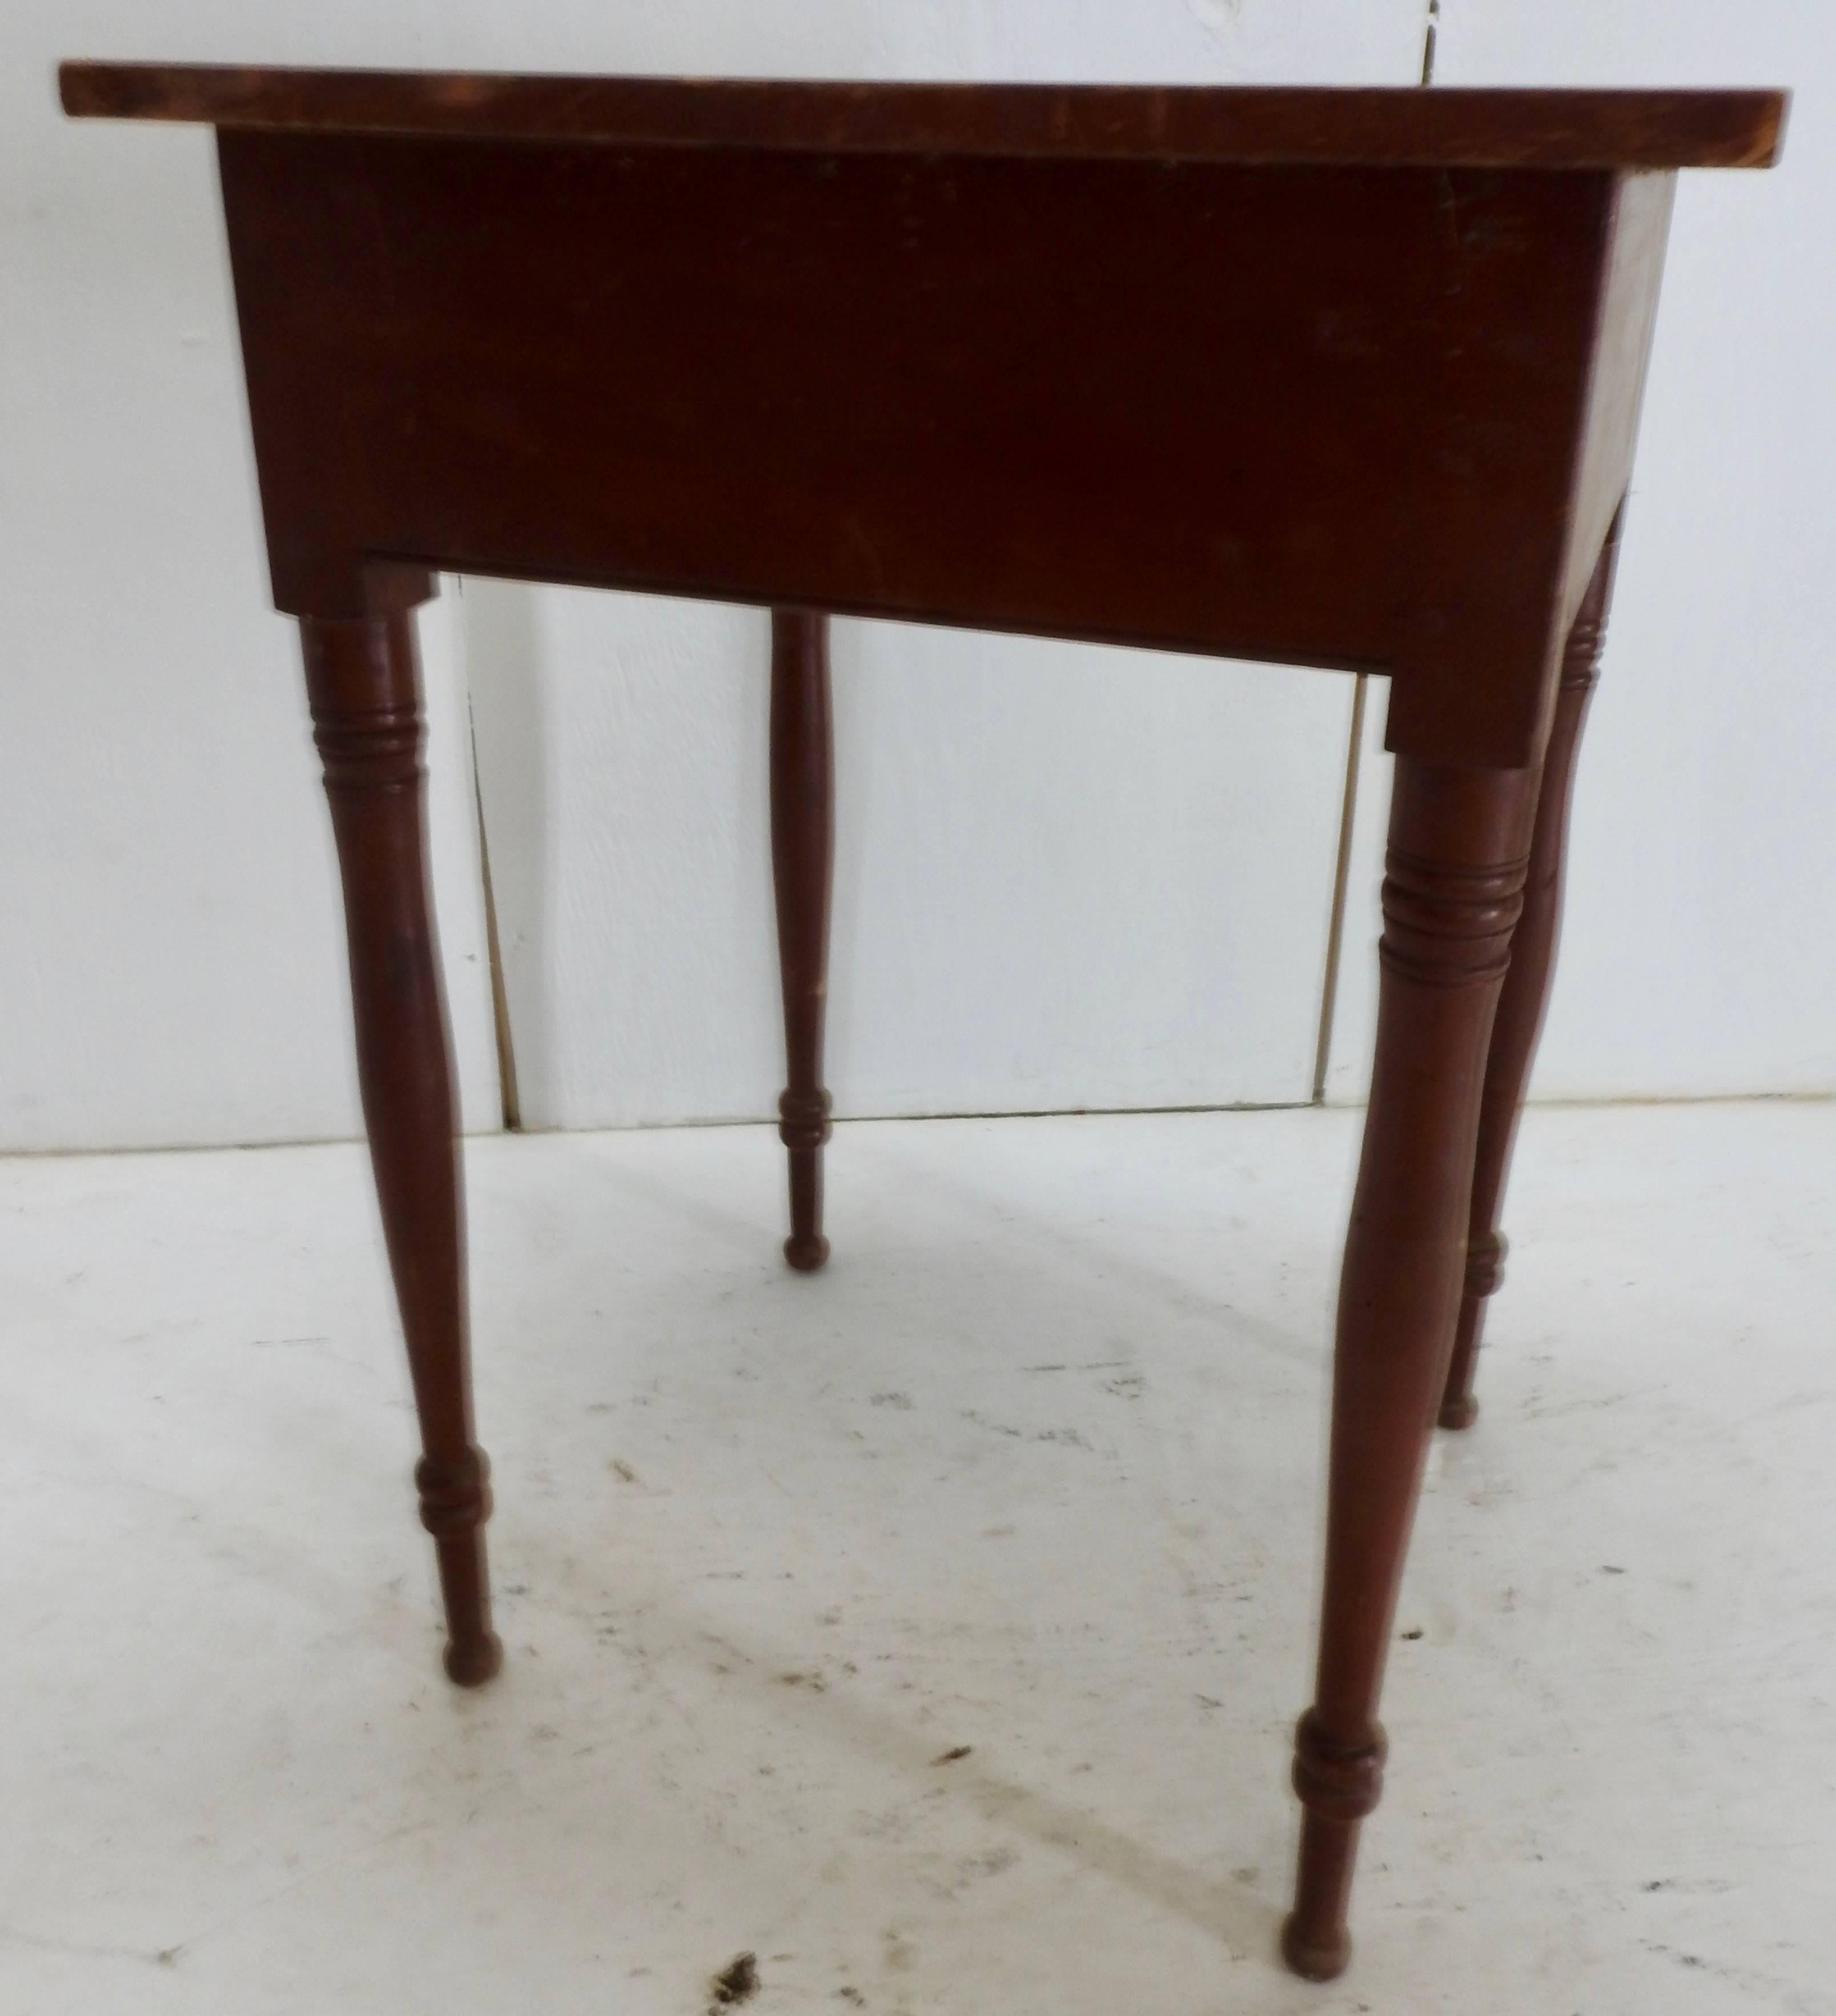 Offering this simple yet beautiful primitive working table featuring a single drawer with dove tailing. It is painted a deep red shade. The four turned spindle legs give the simple lines interest. The top edges have some wear from use. Add this